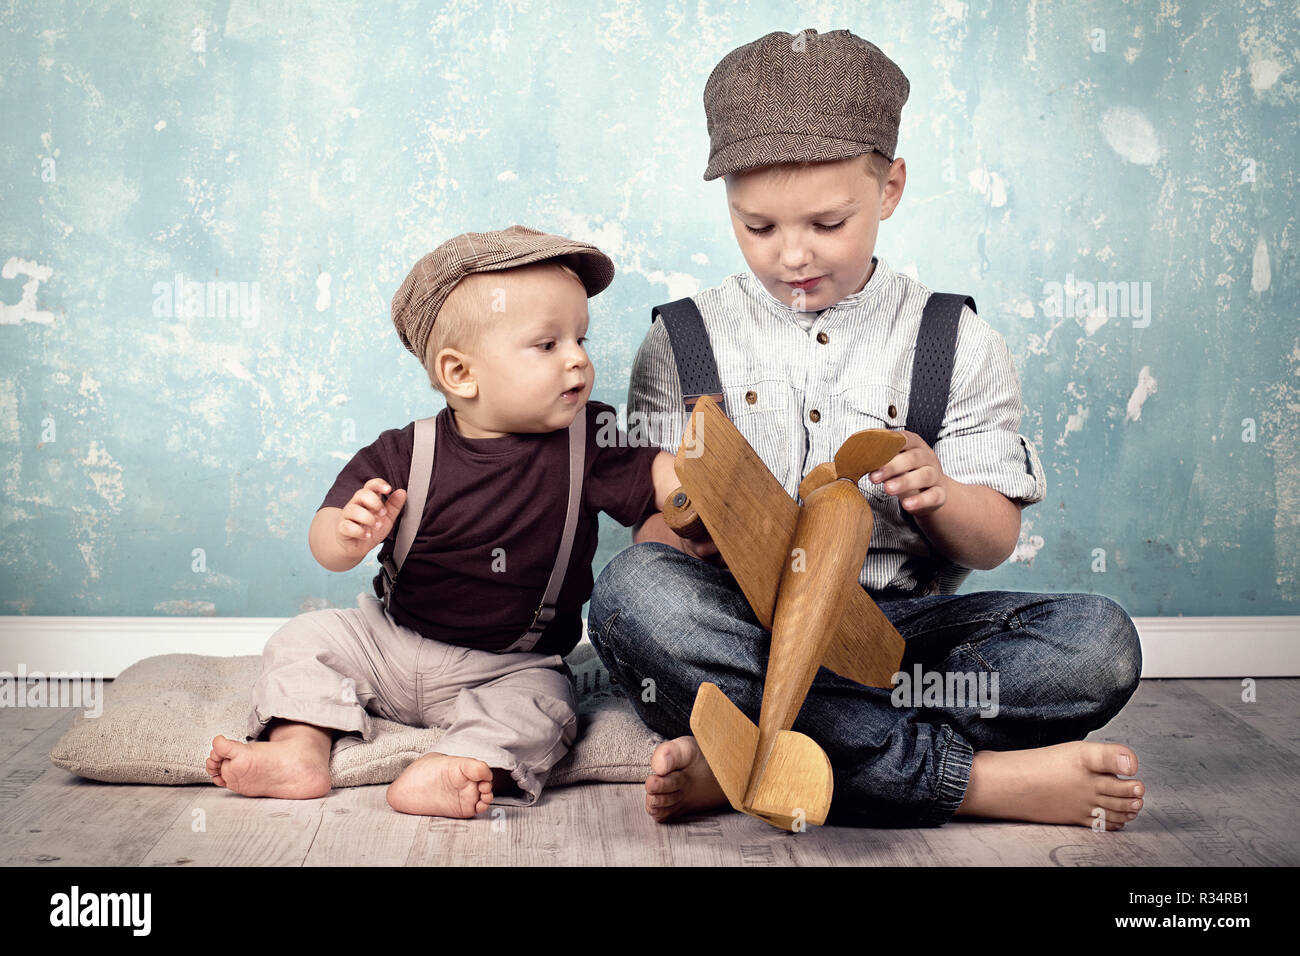 two brothers playing with wooden flyer Stock Photo